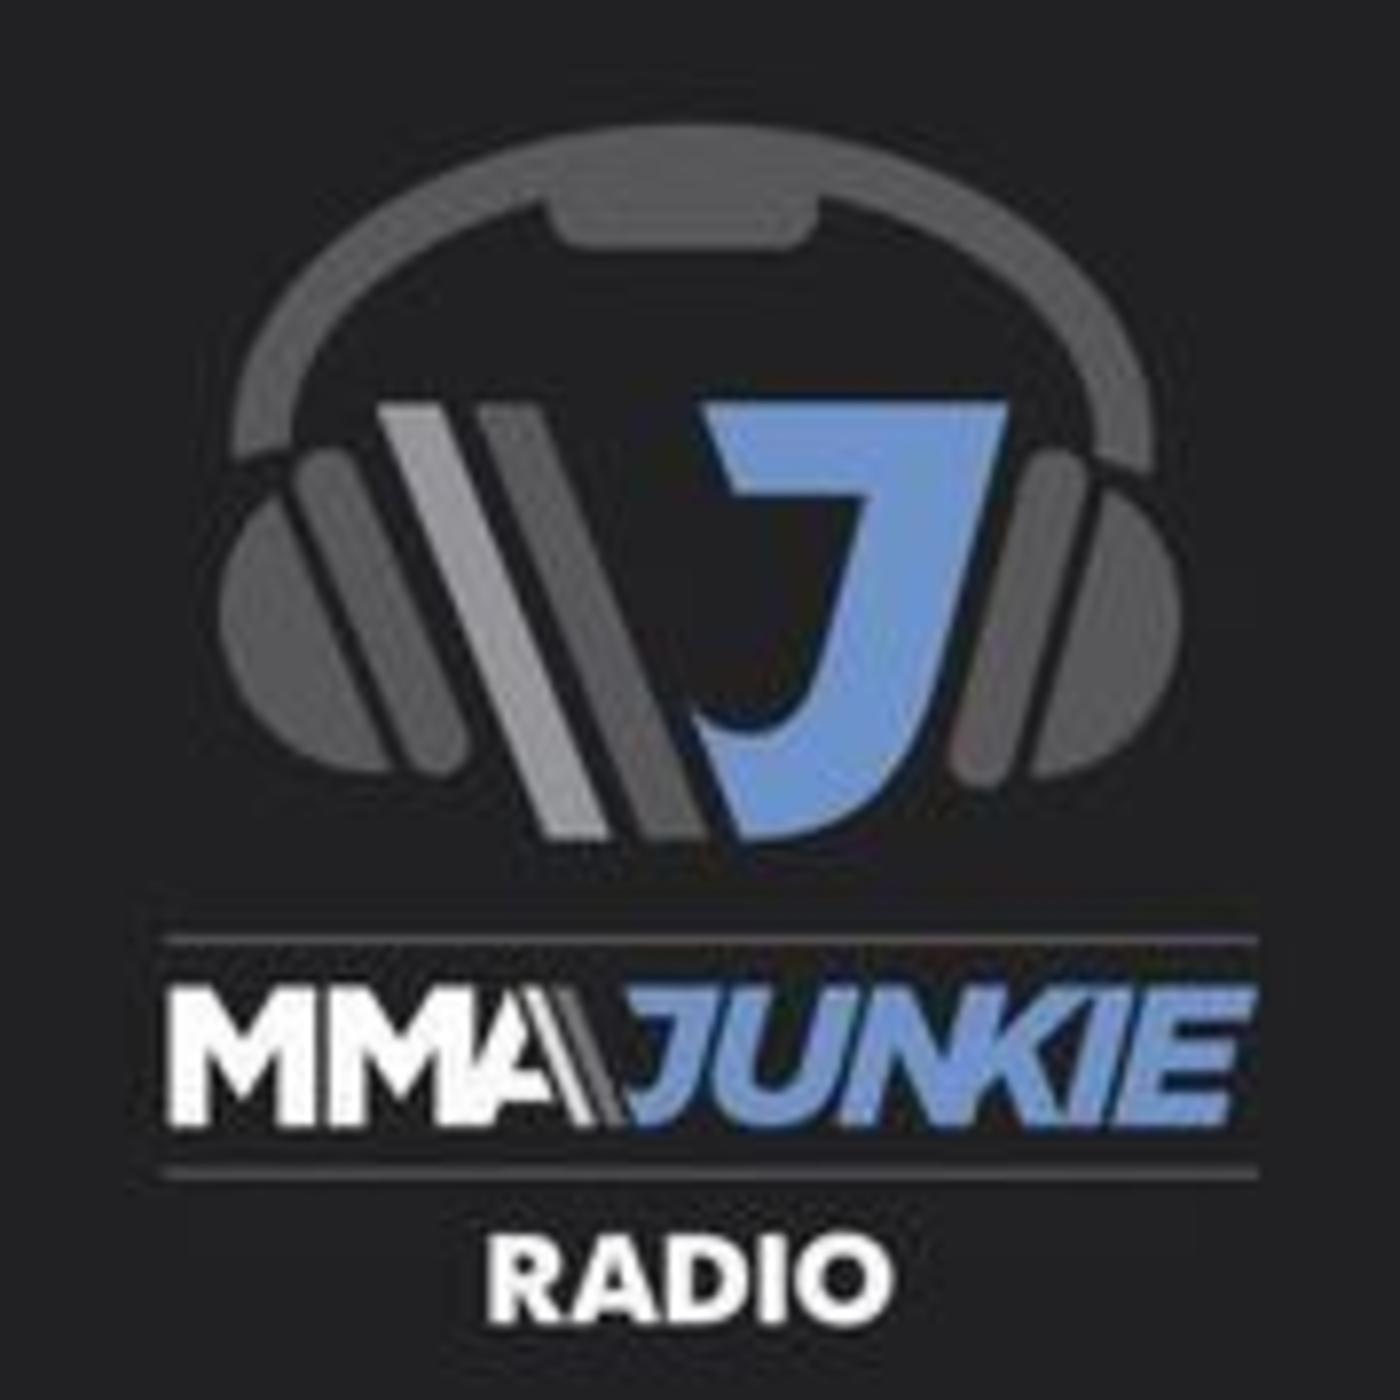 Ep. 3,017: Bud for Cerrone, Reebok for McGregor at UFC 246 and more